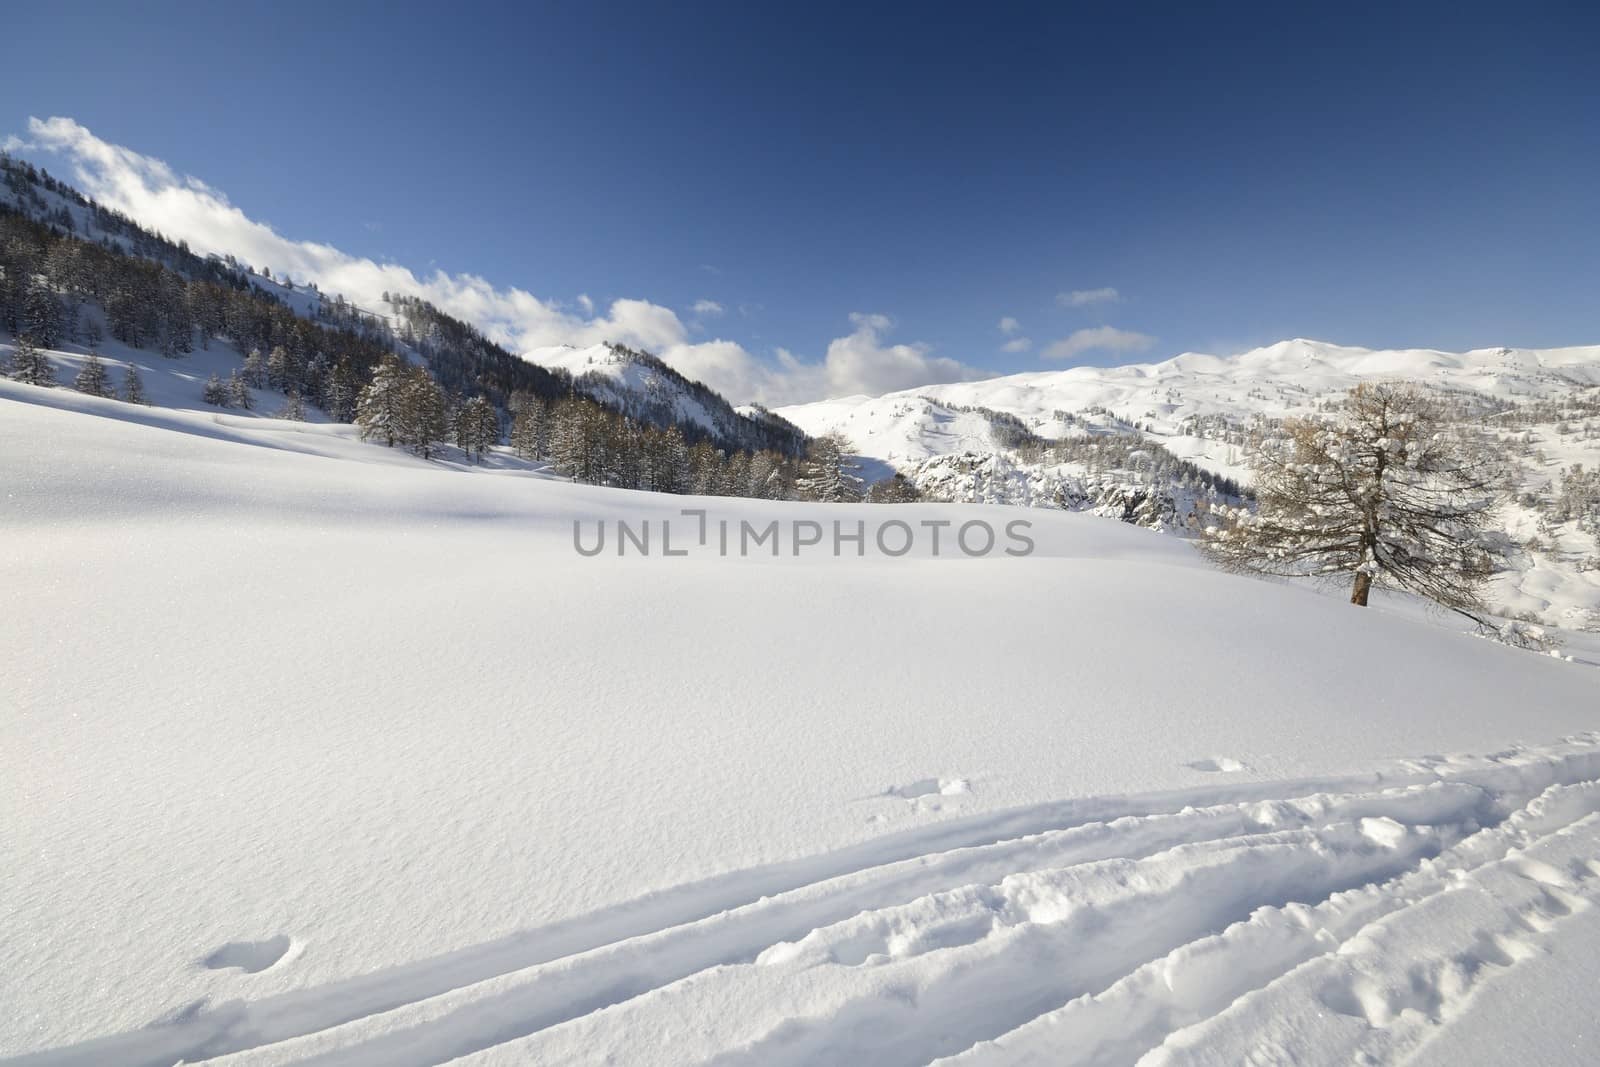 Off piste snowy ski slope in majestic high mountain scenery during ski touring activity in the italian Alps